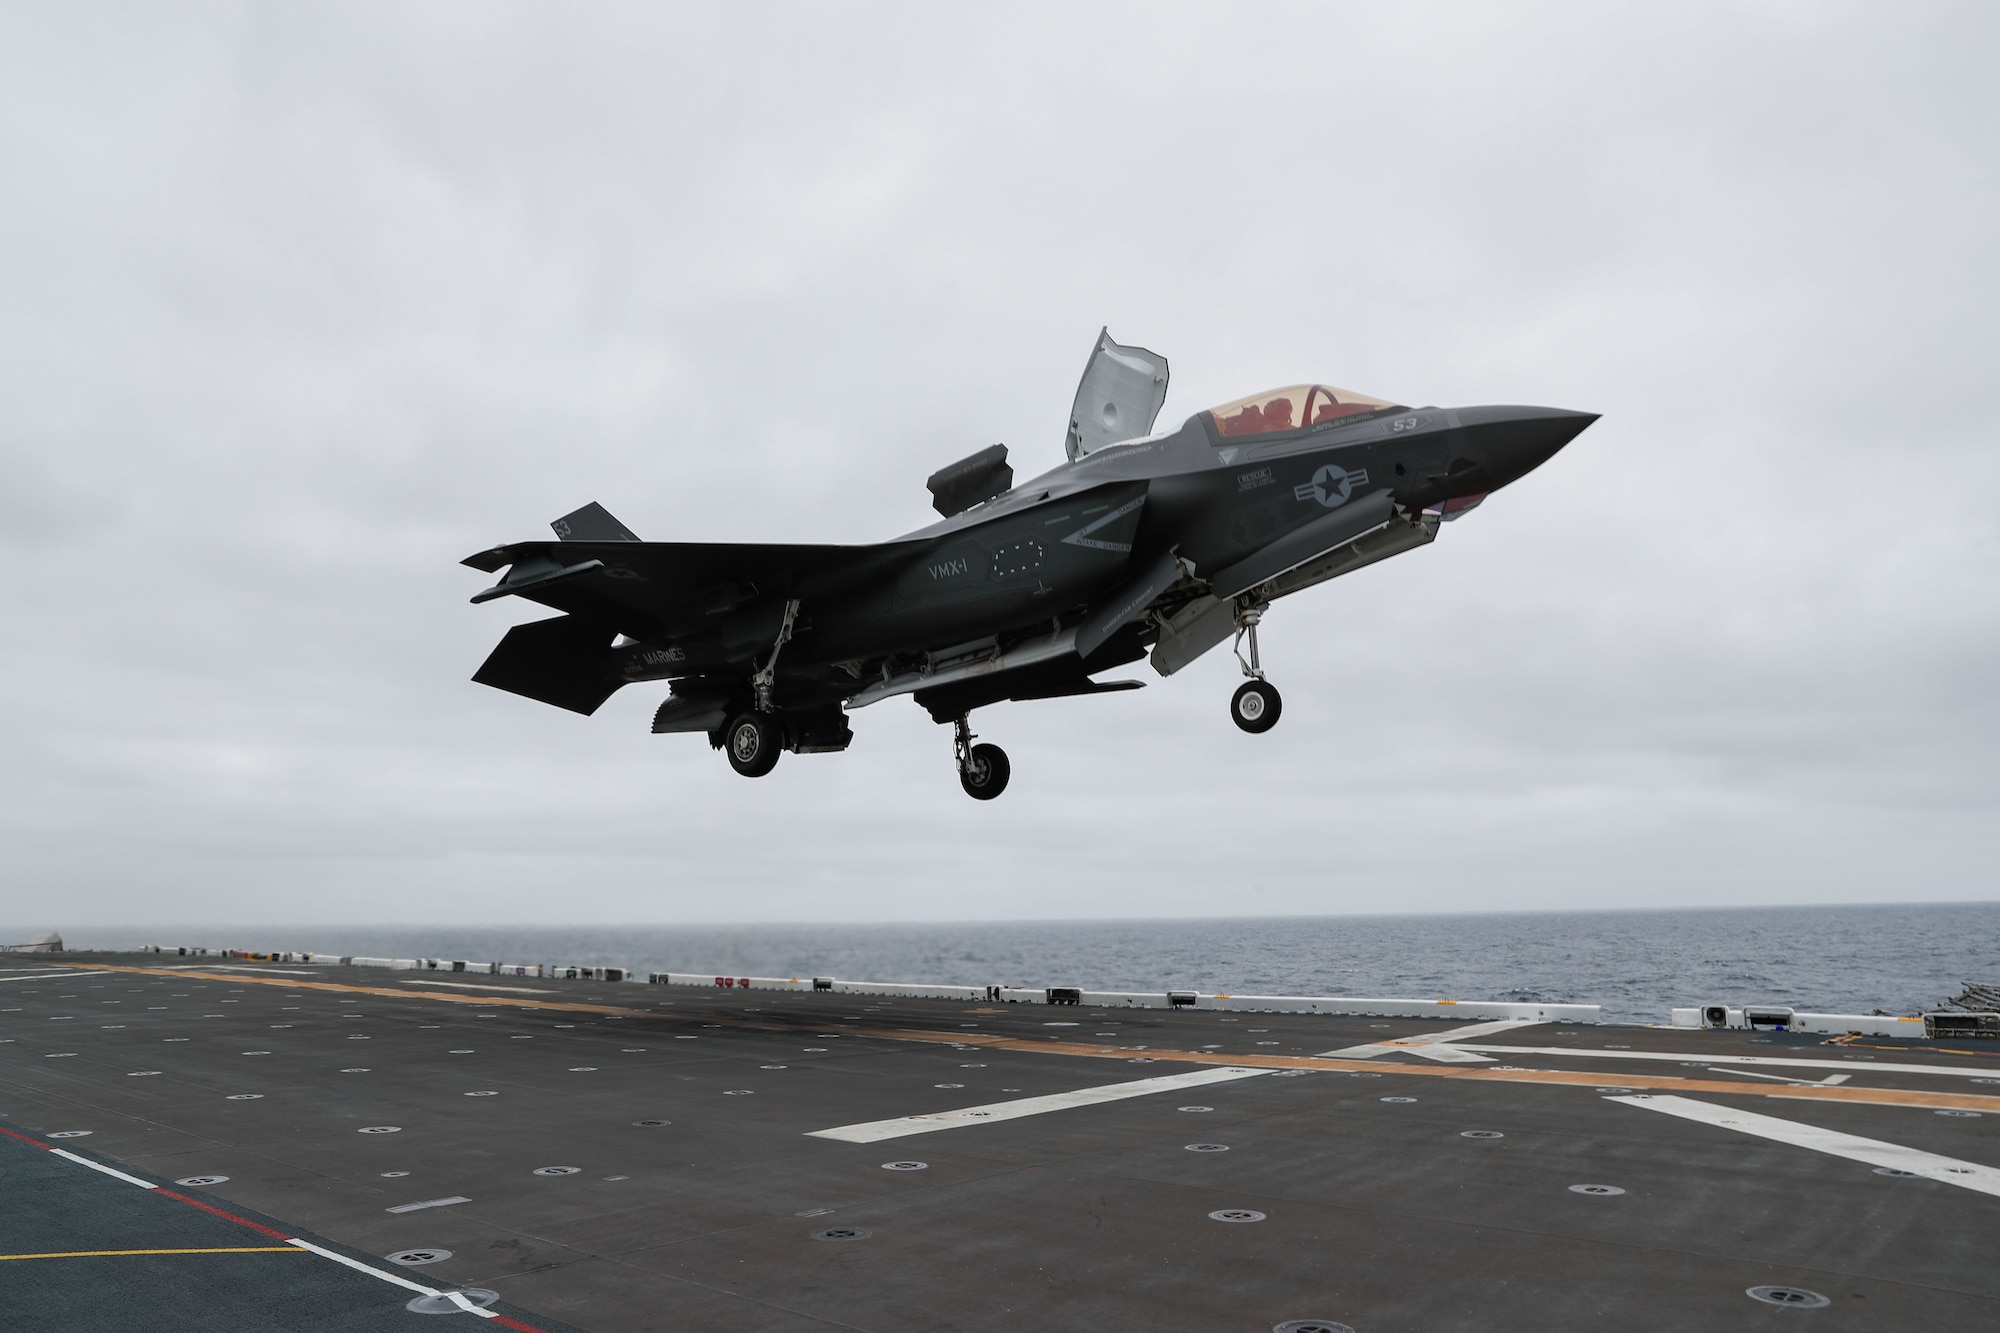 An F-35B Lightning II aircraft attached to Marine Operational Test and Evaluation Squadron (VMX) 1 lands aboard amphibious assault ship USS Tripoli (LHA 7), Mar. 31. VMX-1 is embarked aboard Tripoli as part of the U.S. Marine Corps’ Lightning carrier concept demonstration. The Lightning carrier concept demonstration shows Tripoli and other amphibious assault ships are capable of operating as dedicated fixed-wing carrier platforms, capable of bringing fifth generation Short Takeoff/Vertical Landing aircraft wherever they are required. (U.S. Navy photo by Mass Communication Specialist 3rd Class Maci Sternod)